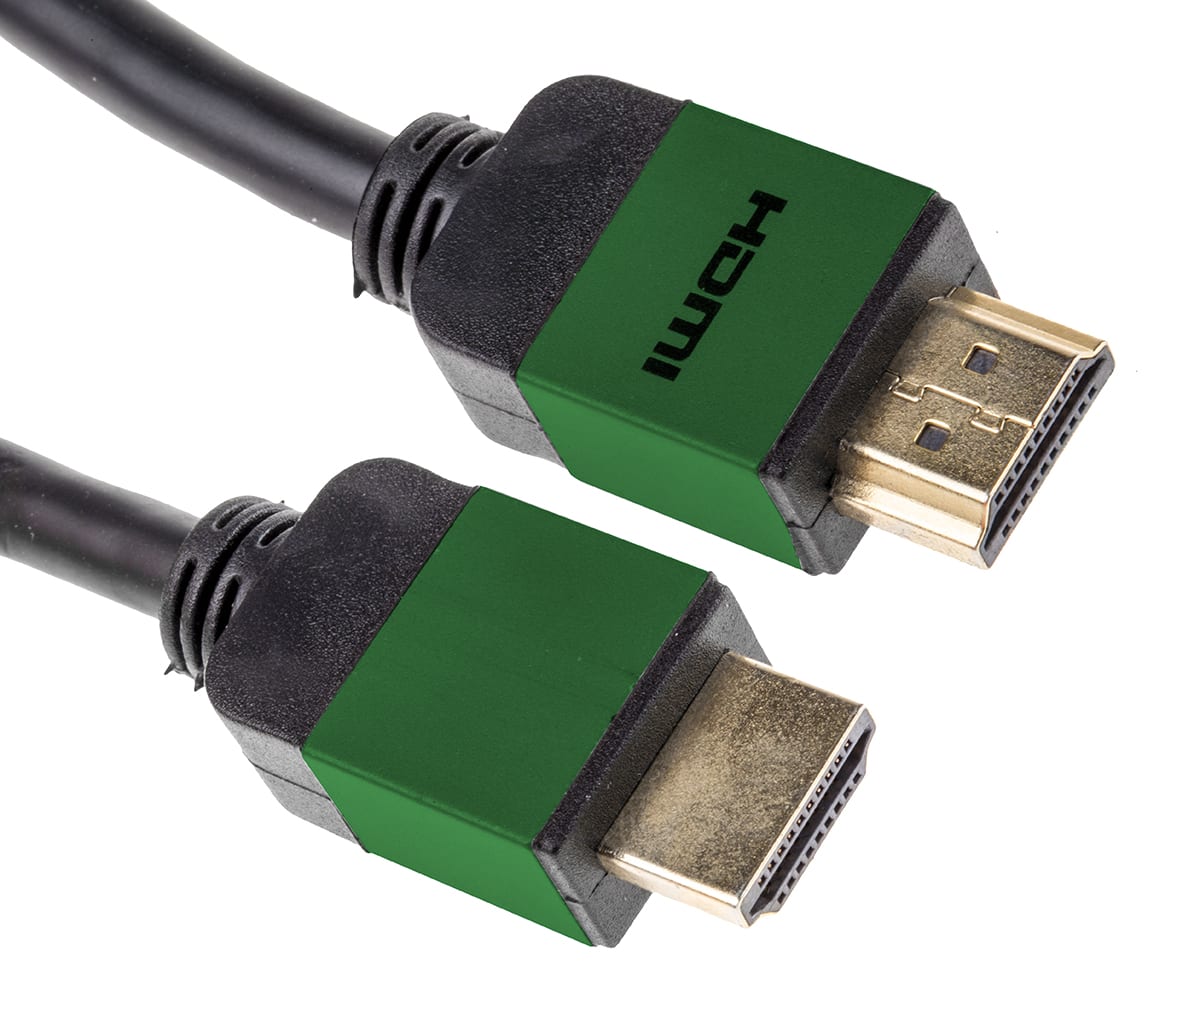 HDMI Cable Buying Guide